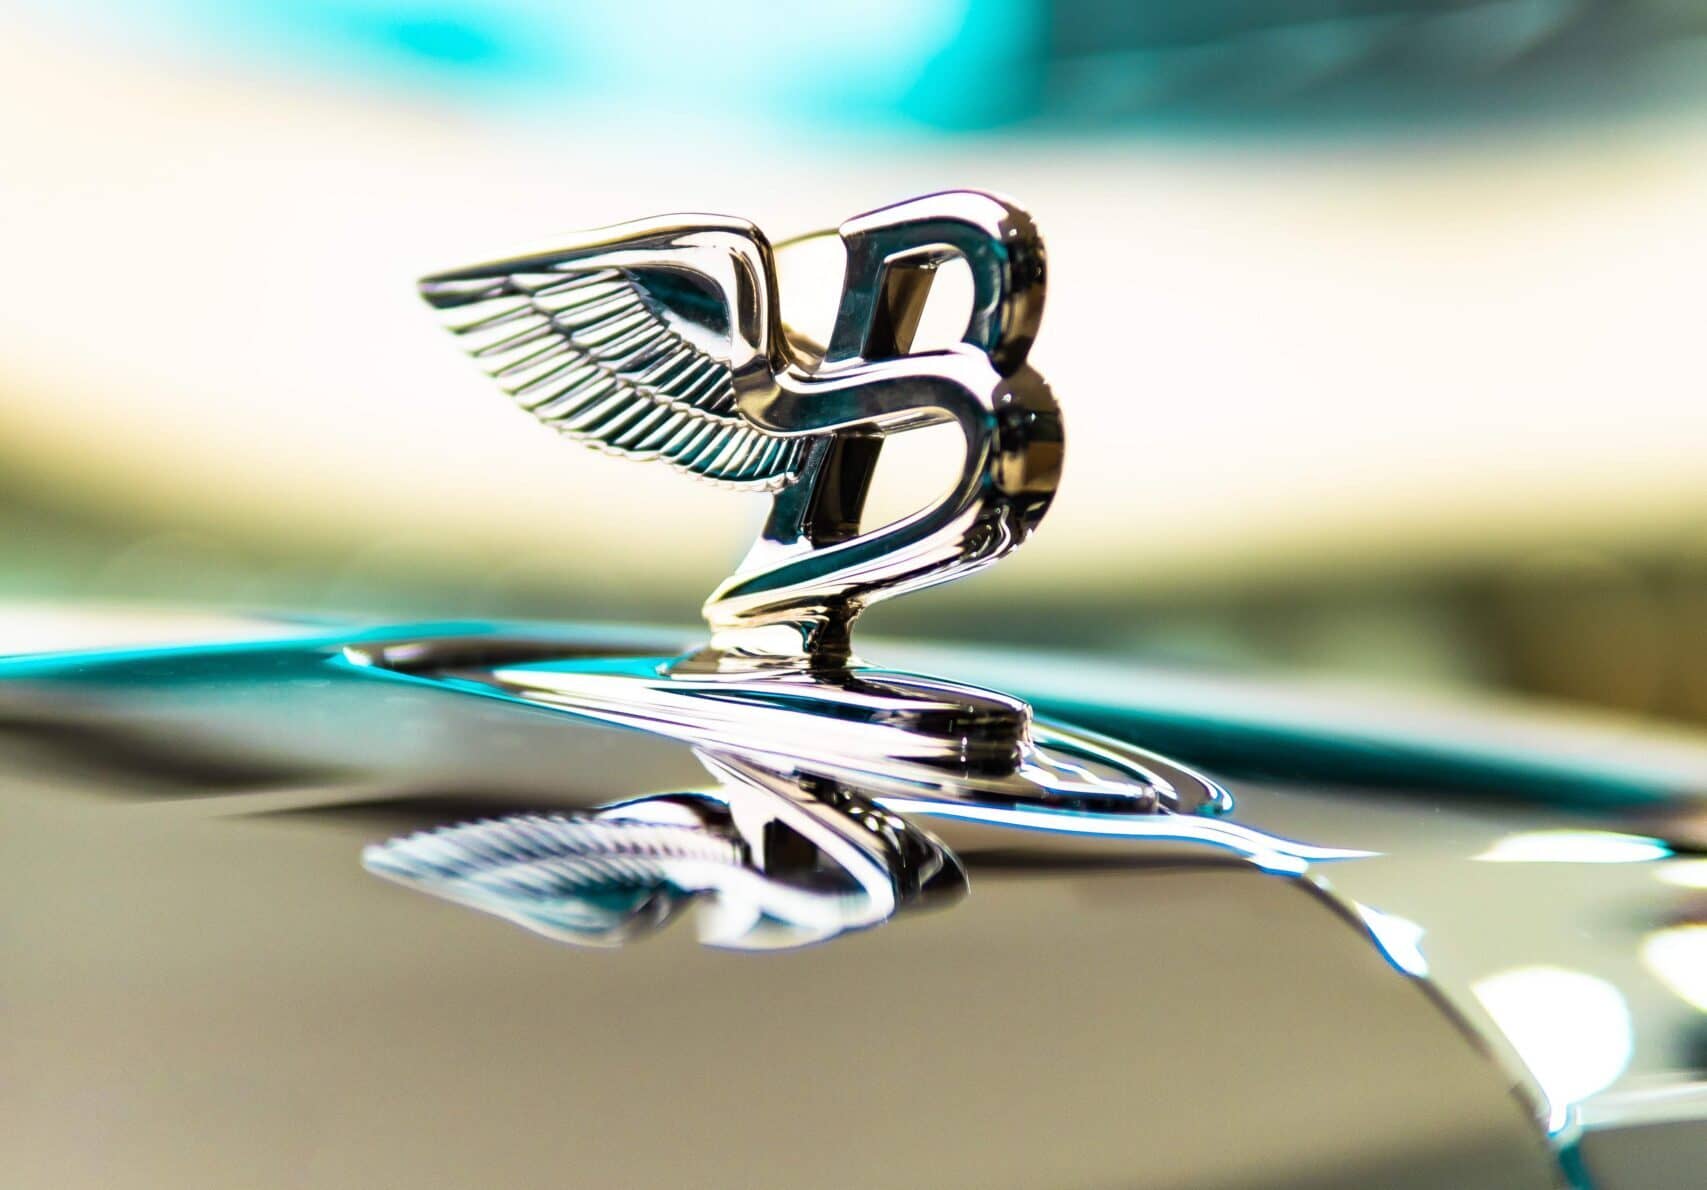 Bentley Bids Goodbye To The 12-Cylinder Engine And Hello To EVs